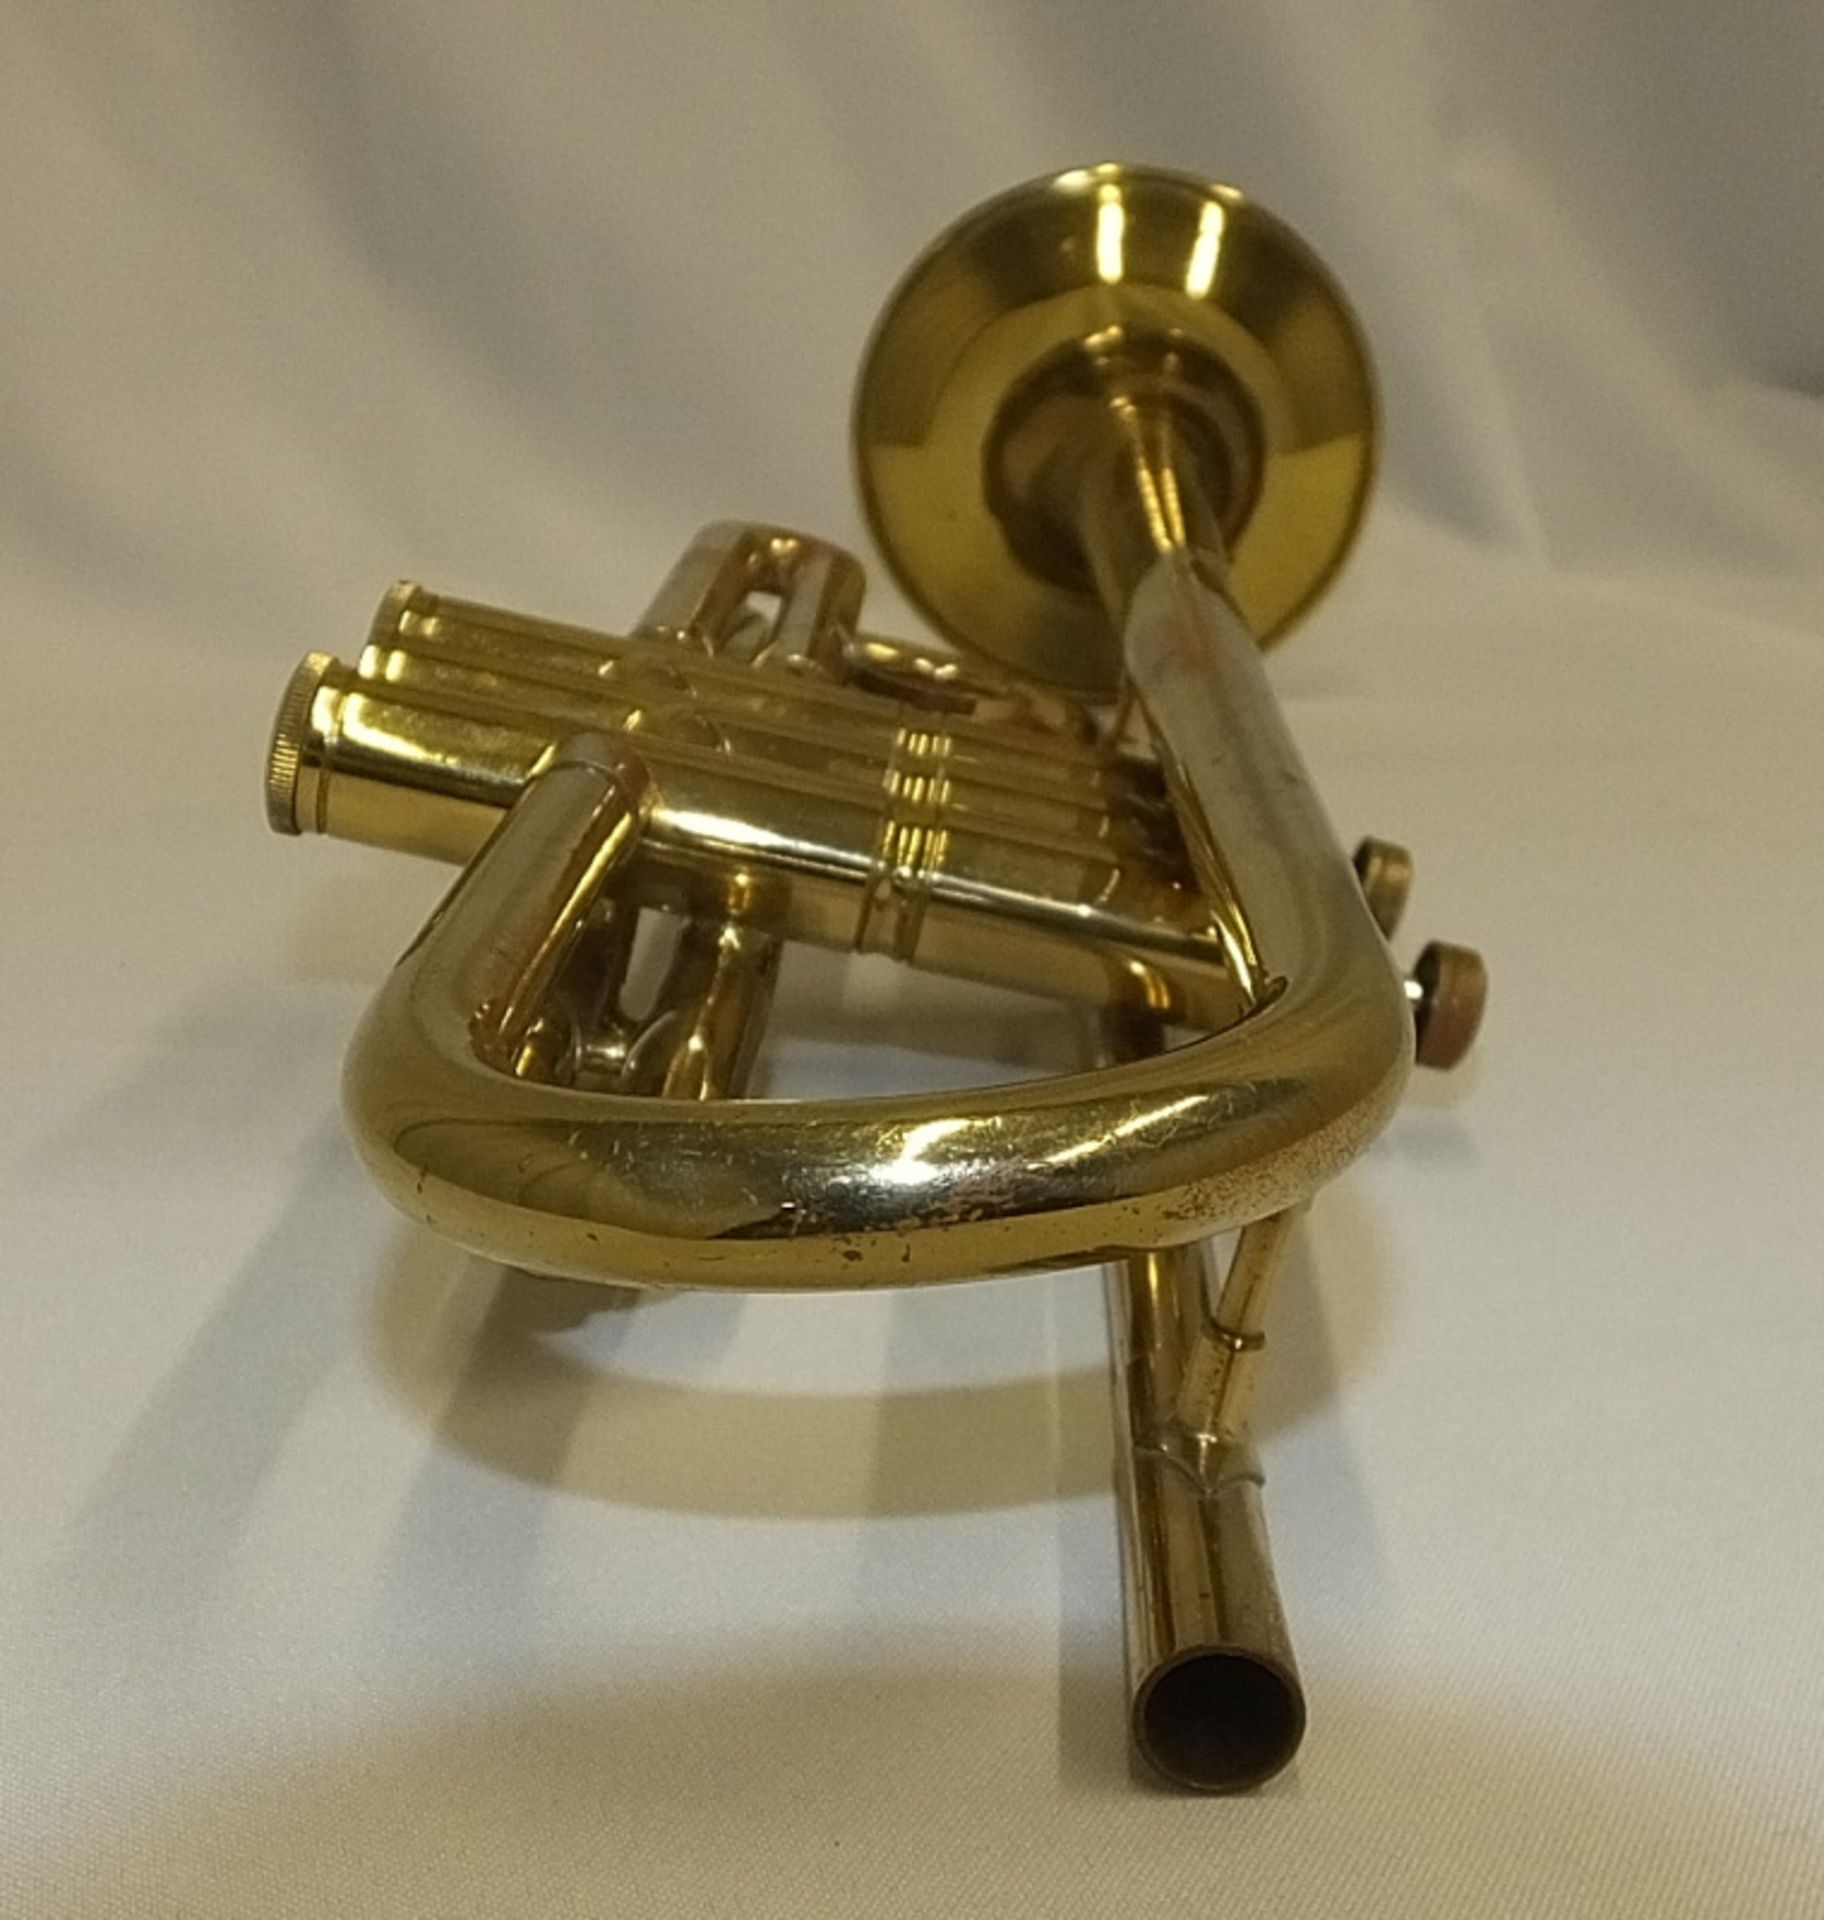 Corton 80 Trumpet in case (middle finger button stuck and no valve cap) - serial number 056142 - Image 10 of 13